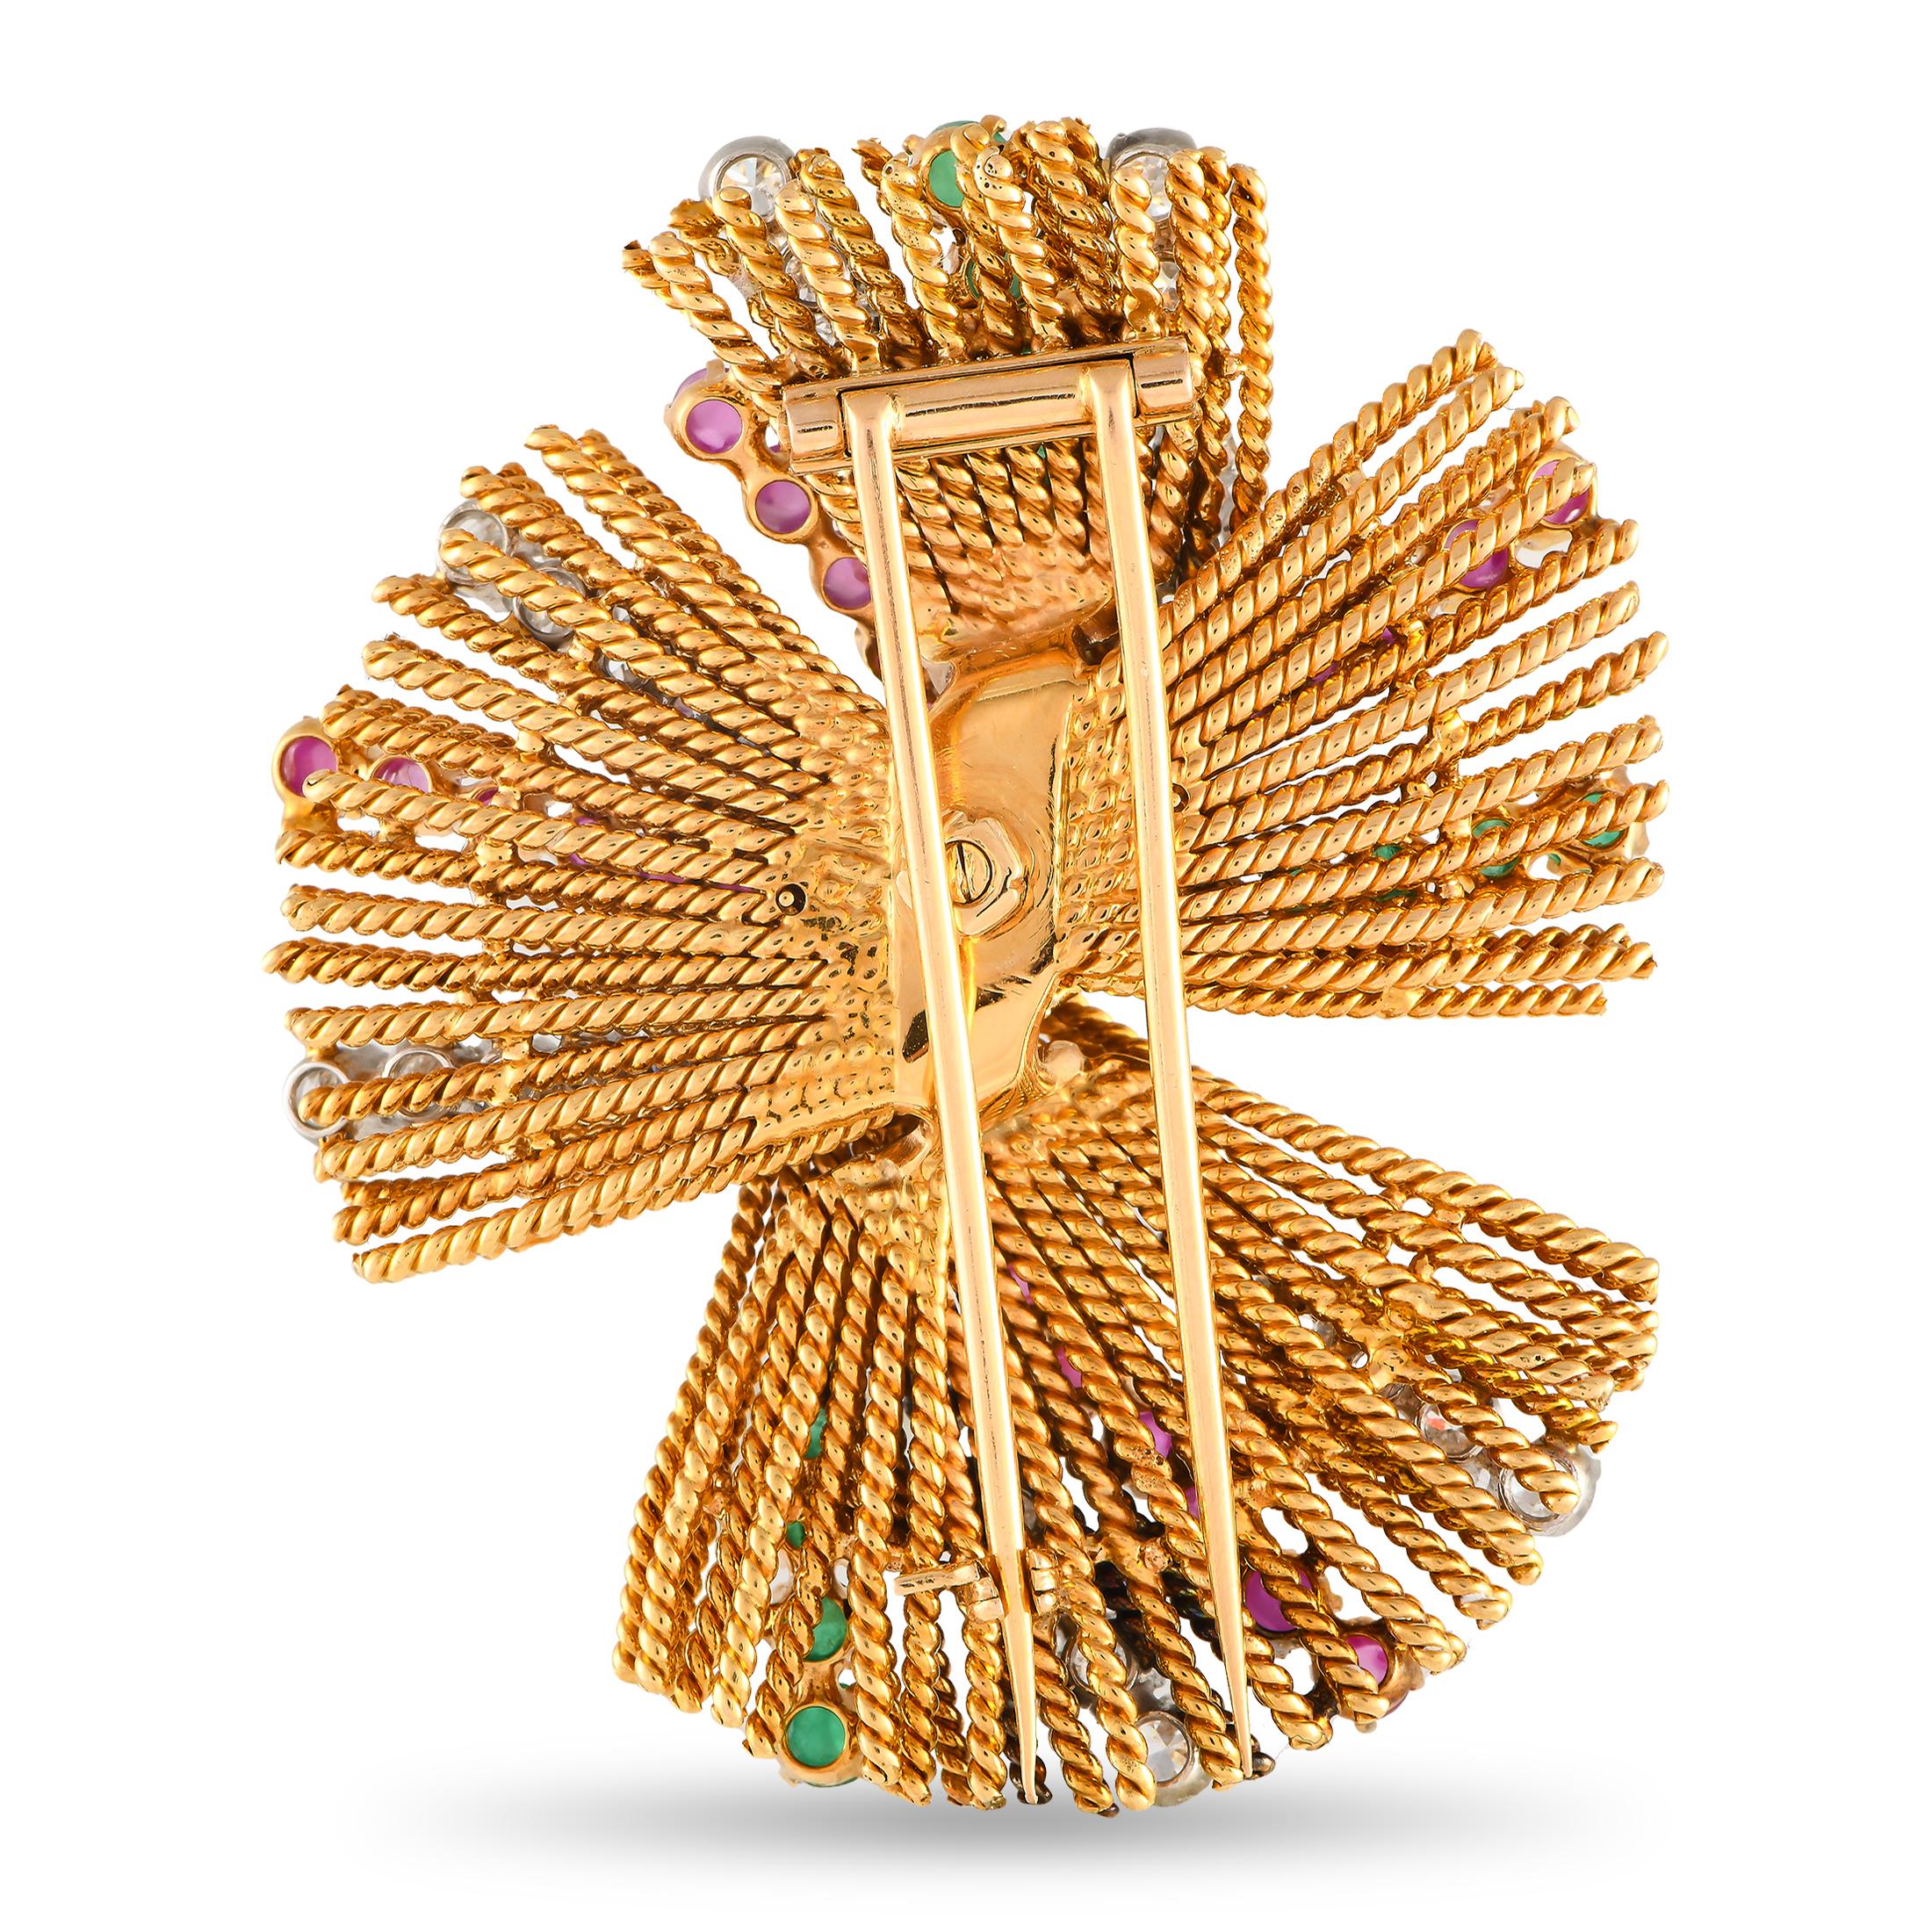 This dynamic 18K yellow gold brooch is a celebration of color, texture, and design. A series of diamonds totaling 2.50 carats are elevated by ruby gemstones totaling 3.10 carats and emeralds with a total weight of 1.50 carats. Rope-like accents add